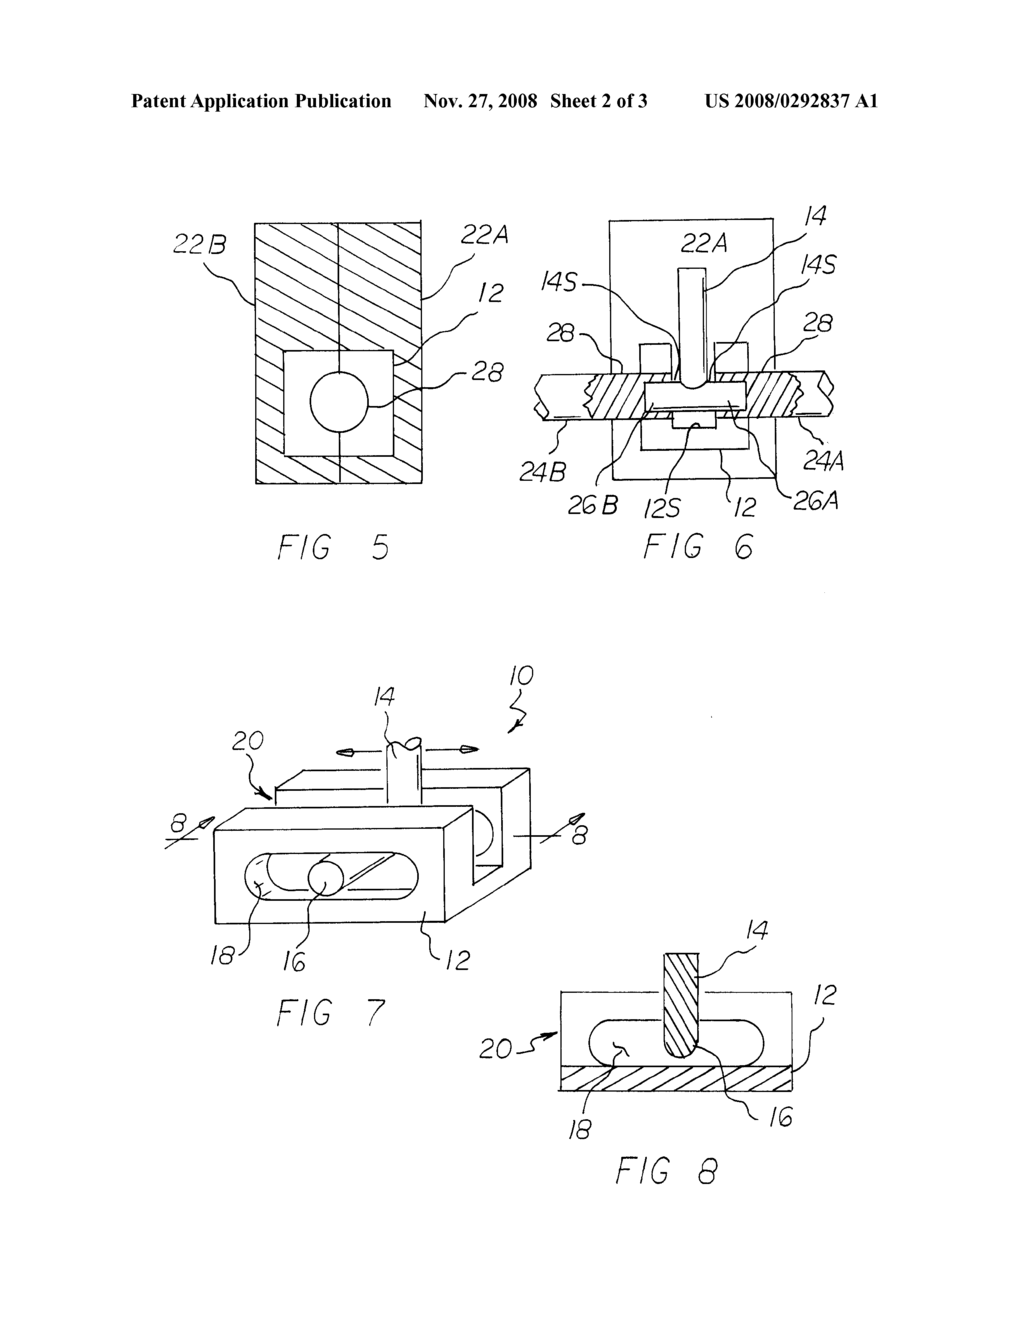 Apparatus and Method for Injection Molding a Fully-Assembled Multi-Component Articulatable Device - diagram, schematic, and image 03